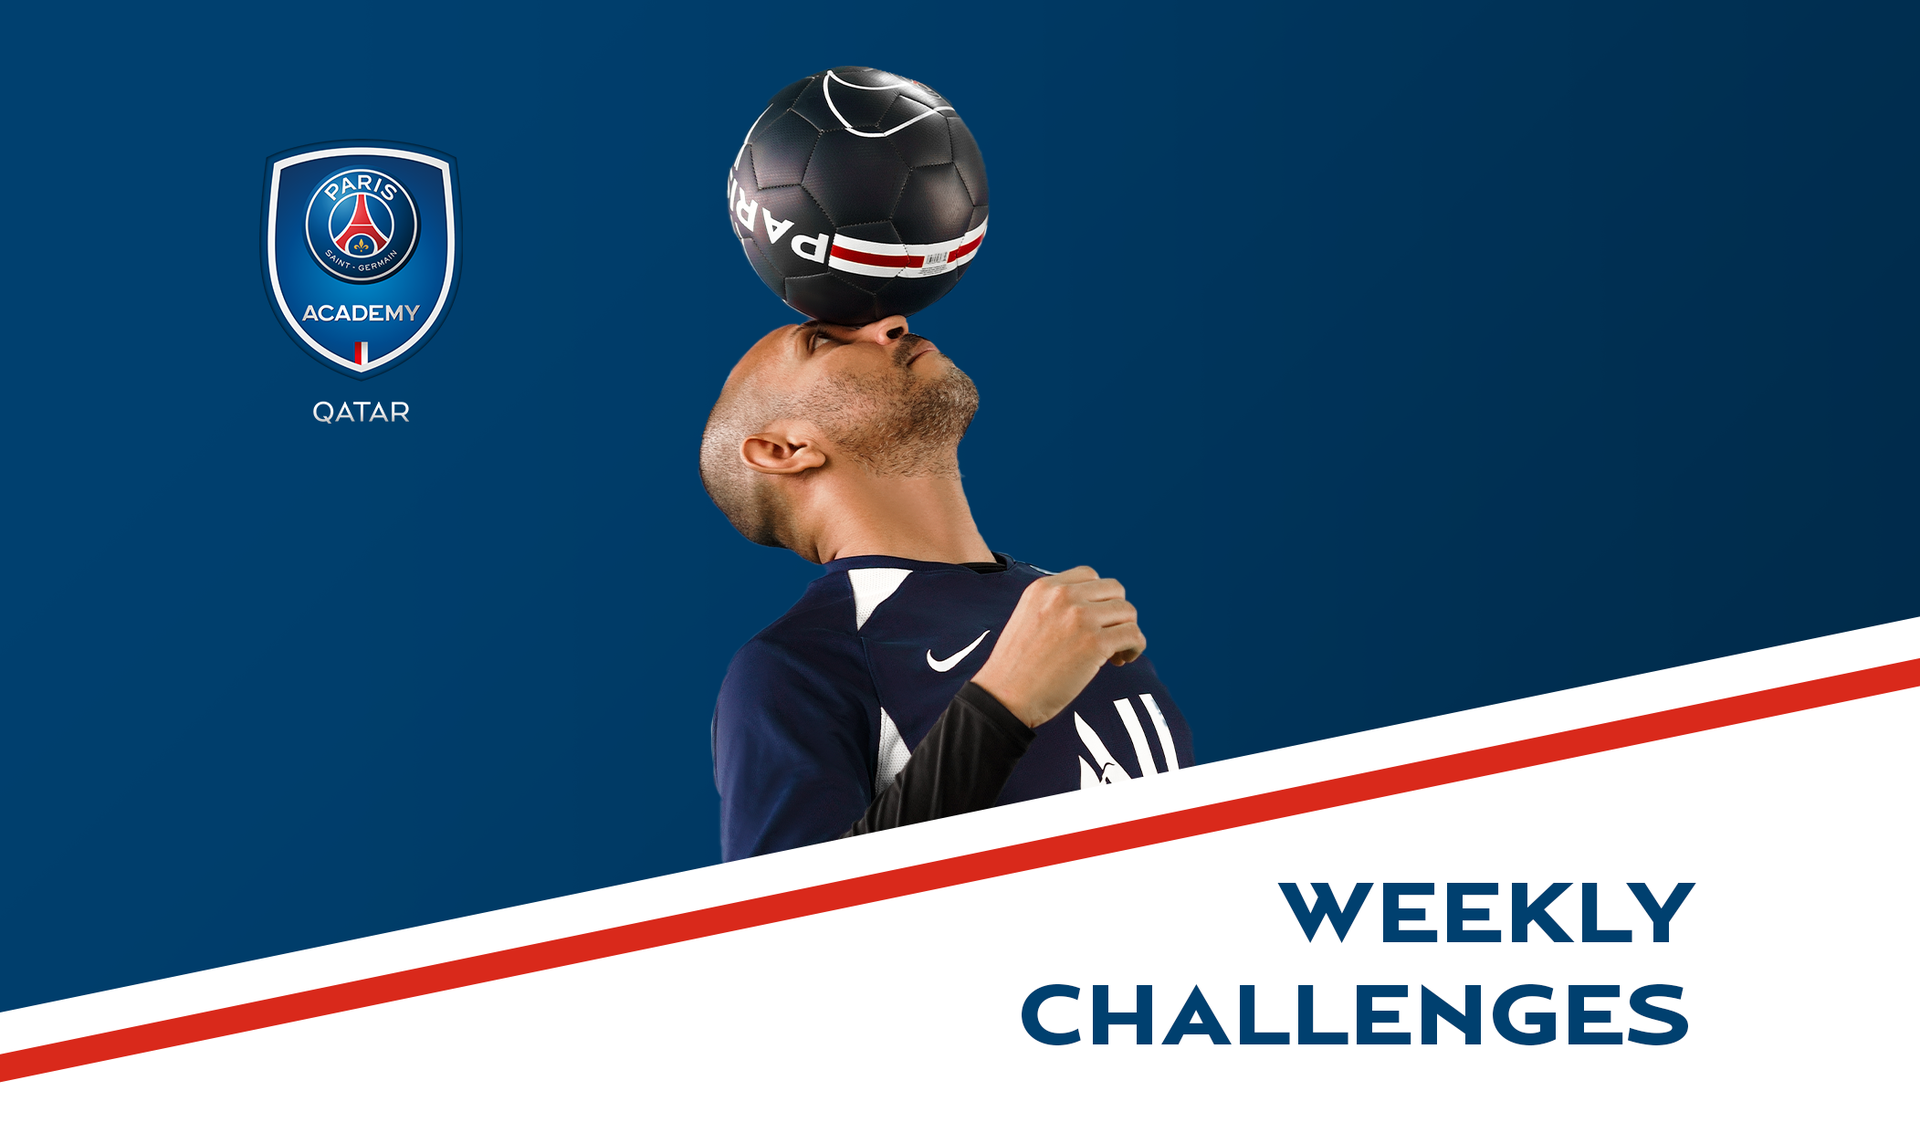 WEEKLY CHALLENGES